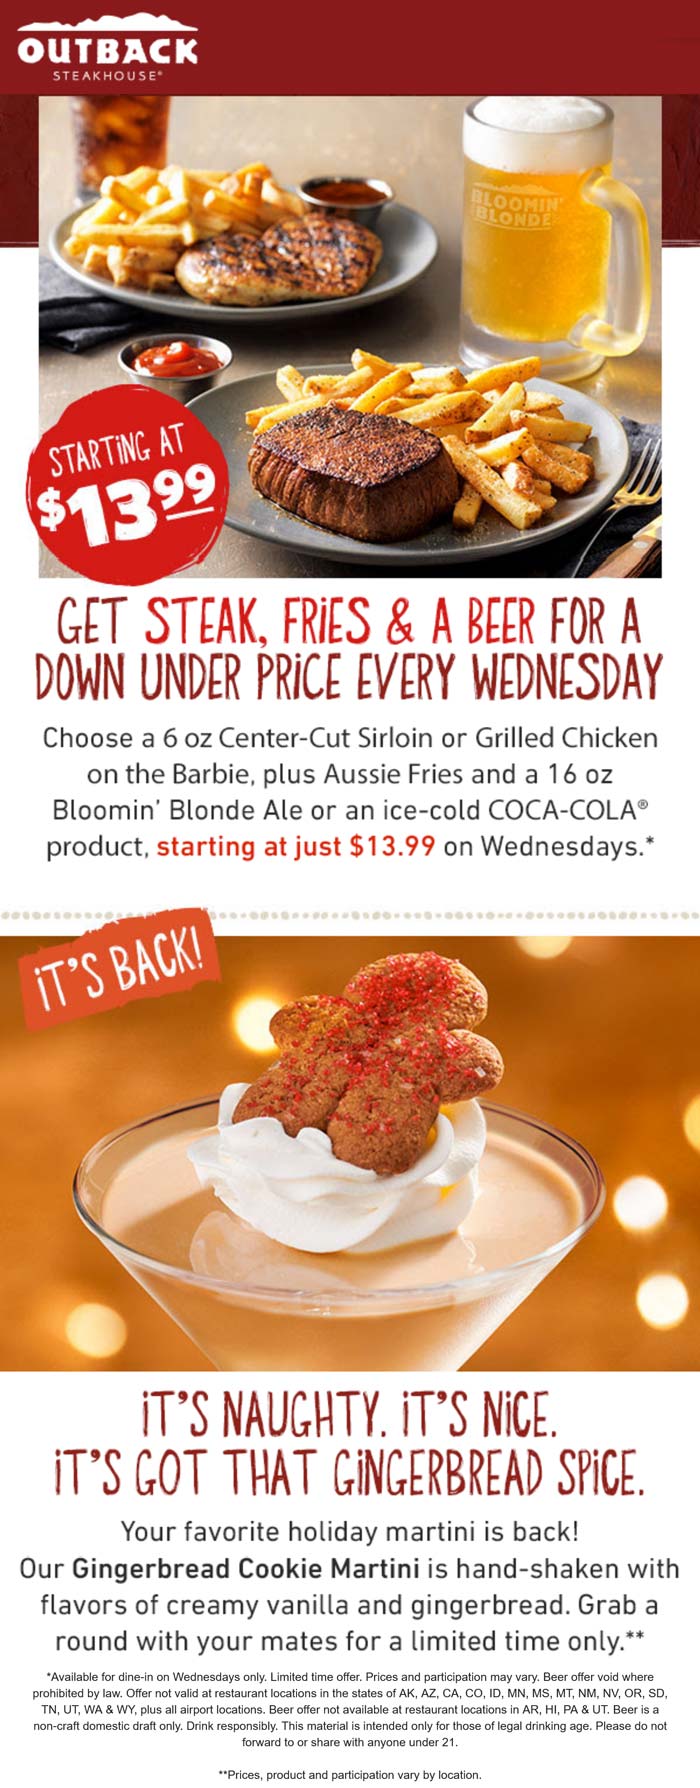 Steak + fries + beer = $14 today at Outback Steakhouse #outbacksteakhouse